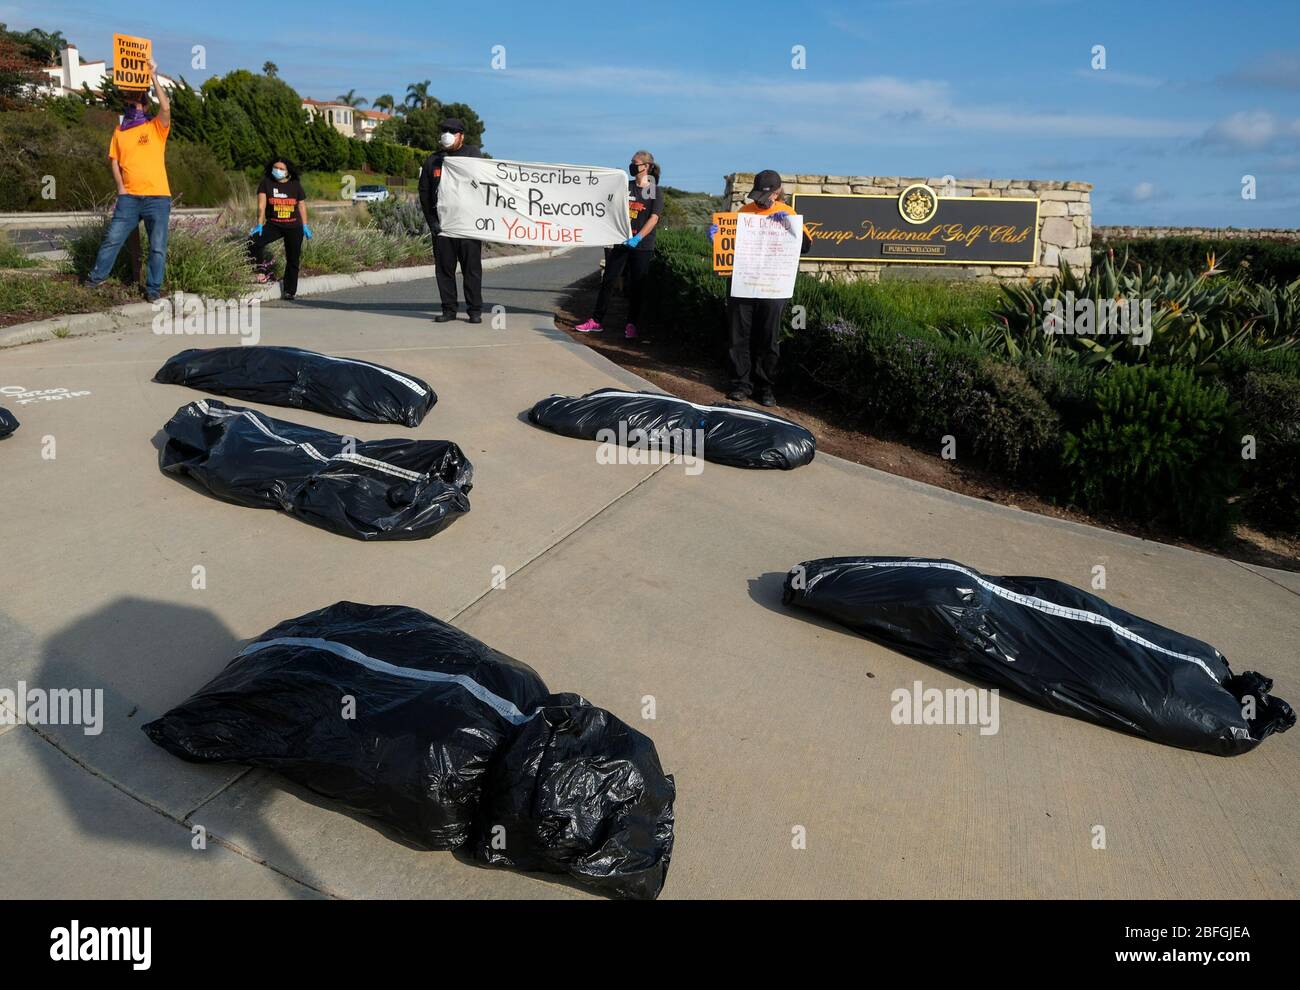 Los Angeles, California, USA. 18th Apr, 2020. Fake body bags are placed at outside Trump National Golf Club Los Angeles in protest against U.S. President Donald Trump's response to the coronavirus disease (COVID-19) pandemic, in Rancho Palos Verdes, California, April 18, 2020. Credit: Ringo Chiu/ZUMA Wire/Alamy Live News Stock Photo